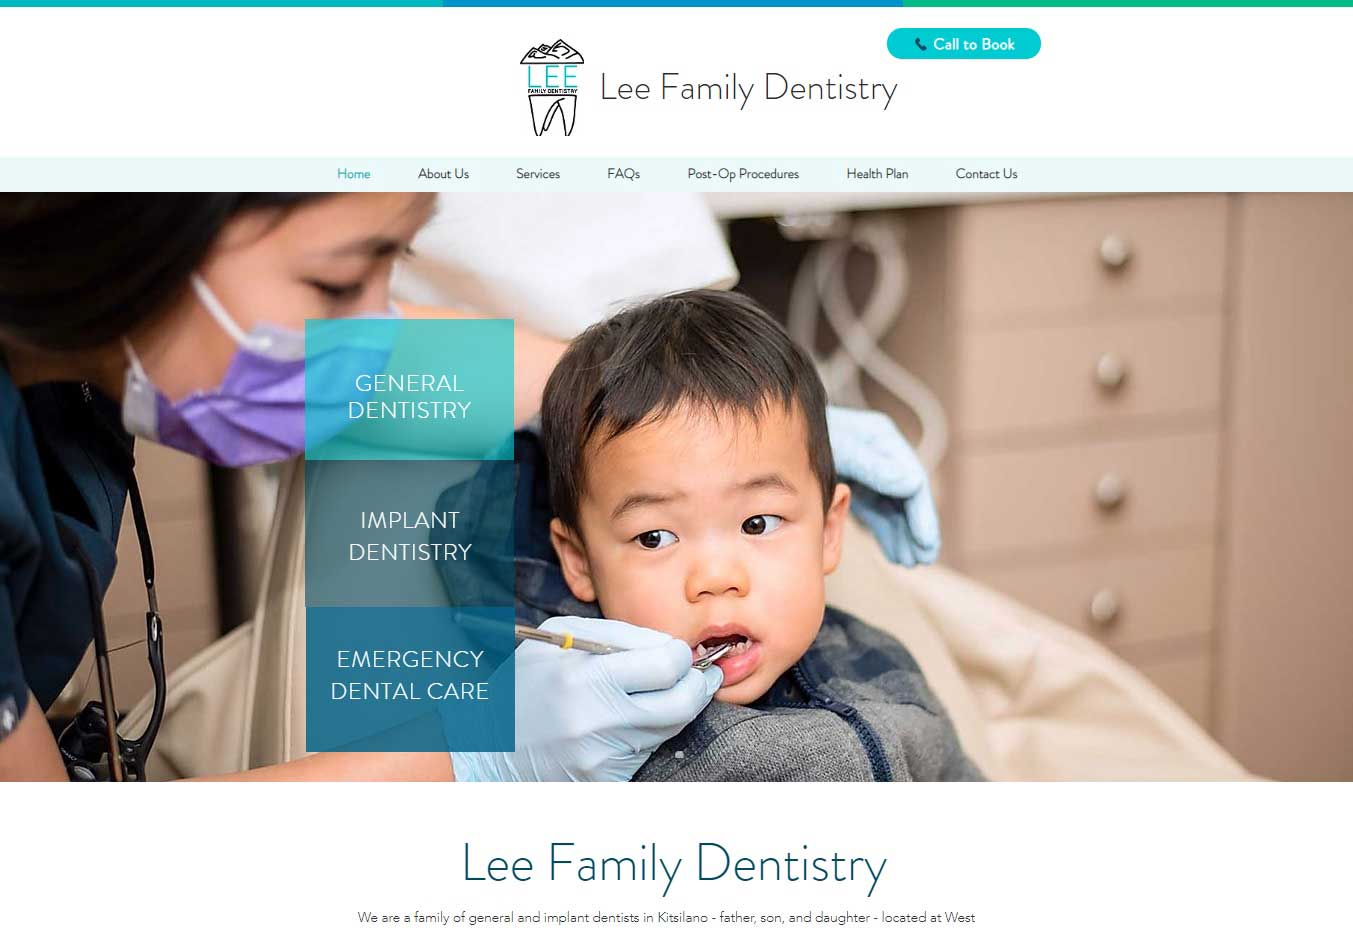 Lee Family Dentistry project by Lara Spence team, WordPress Vancouver